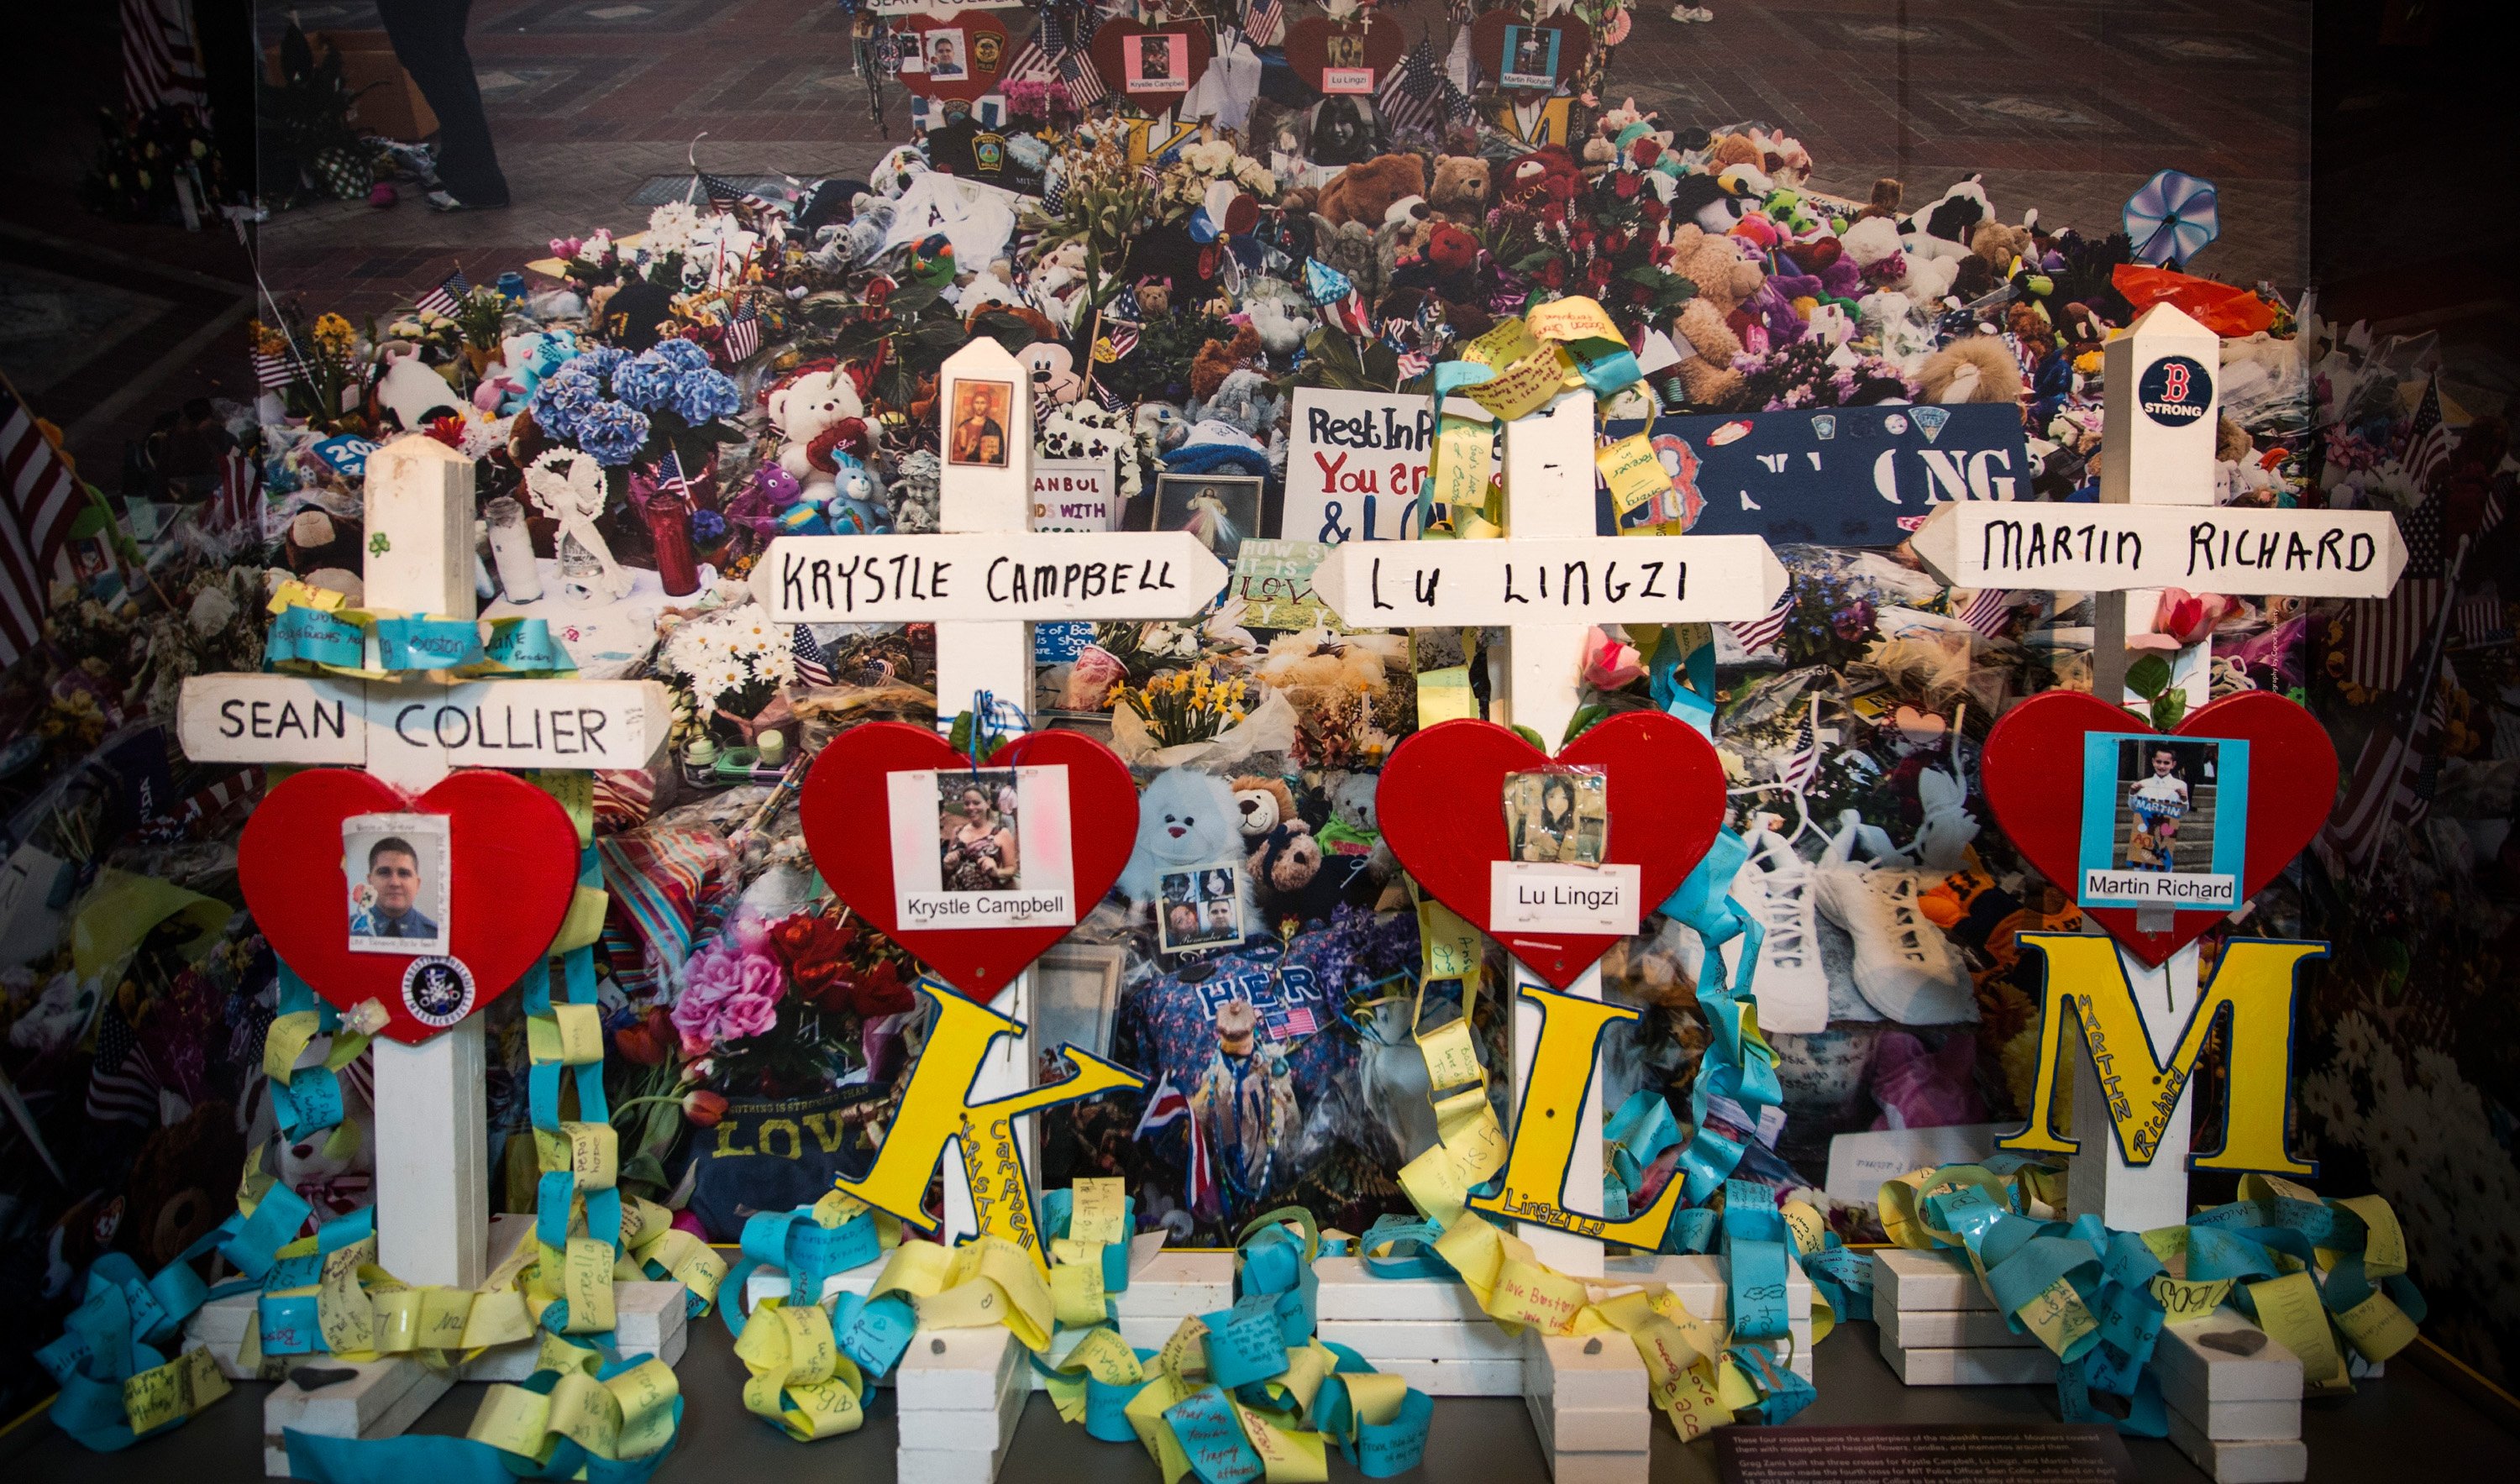 Crosses bearing the names of victims of the 2013 Boston Marathon bombing are displayed in a memorial at the Boston Public Library on April 14, 2014 in Boston.